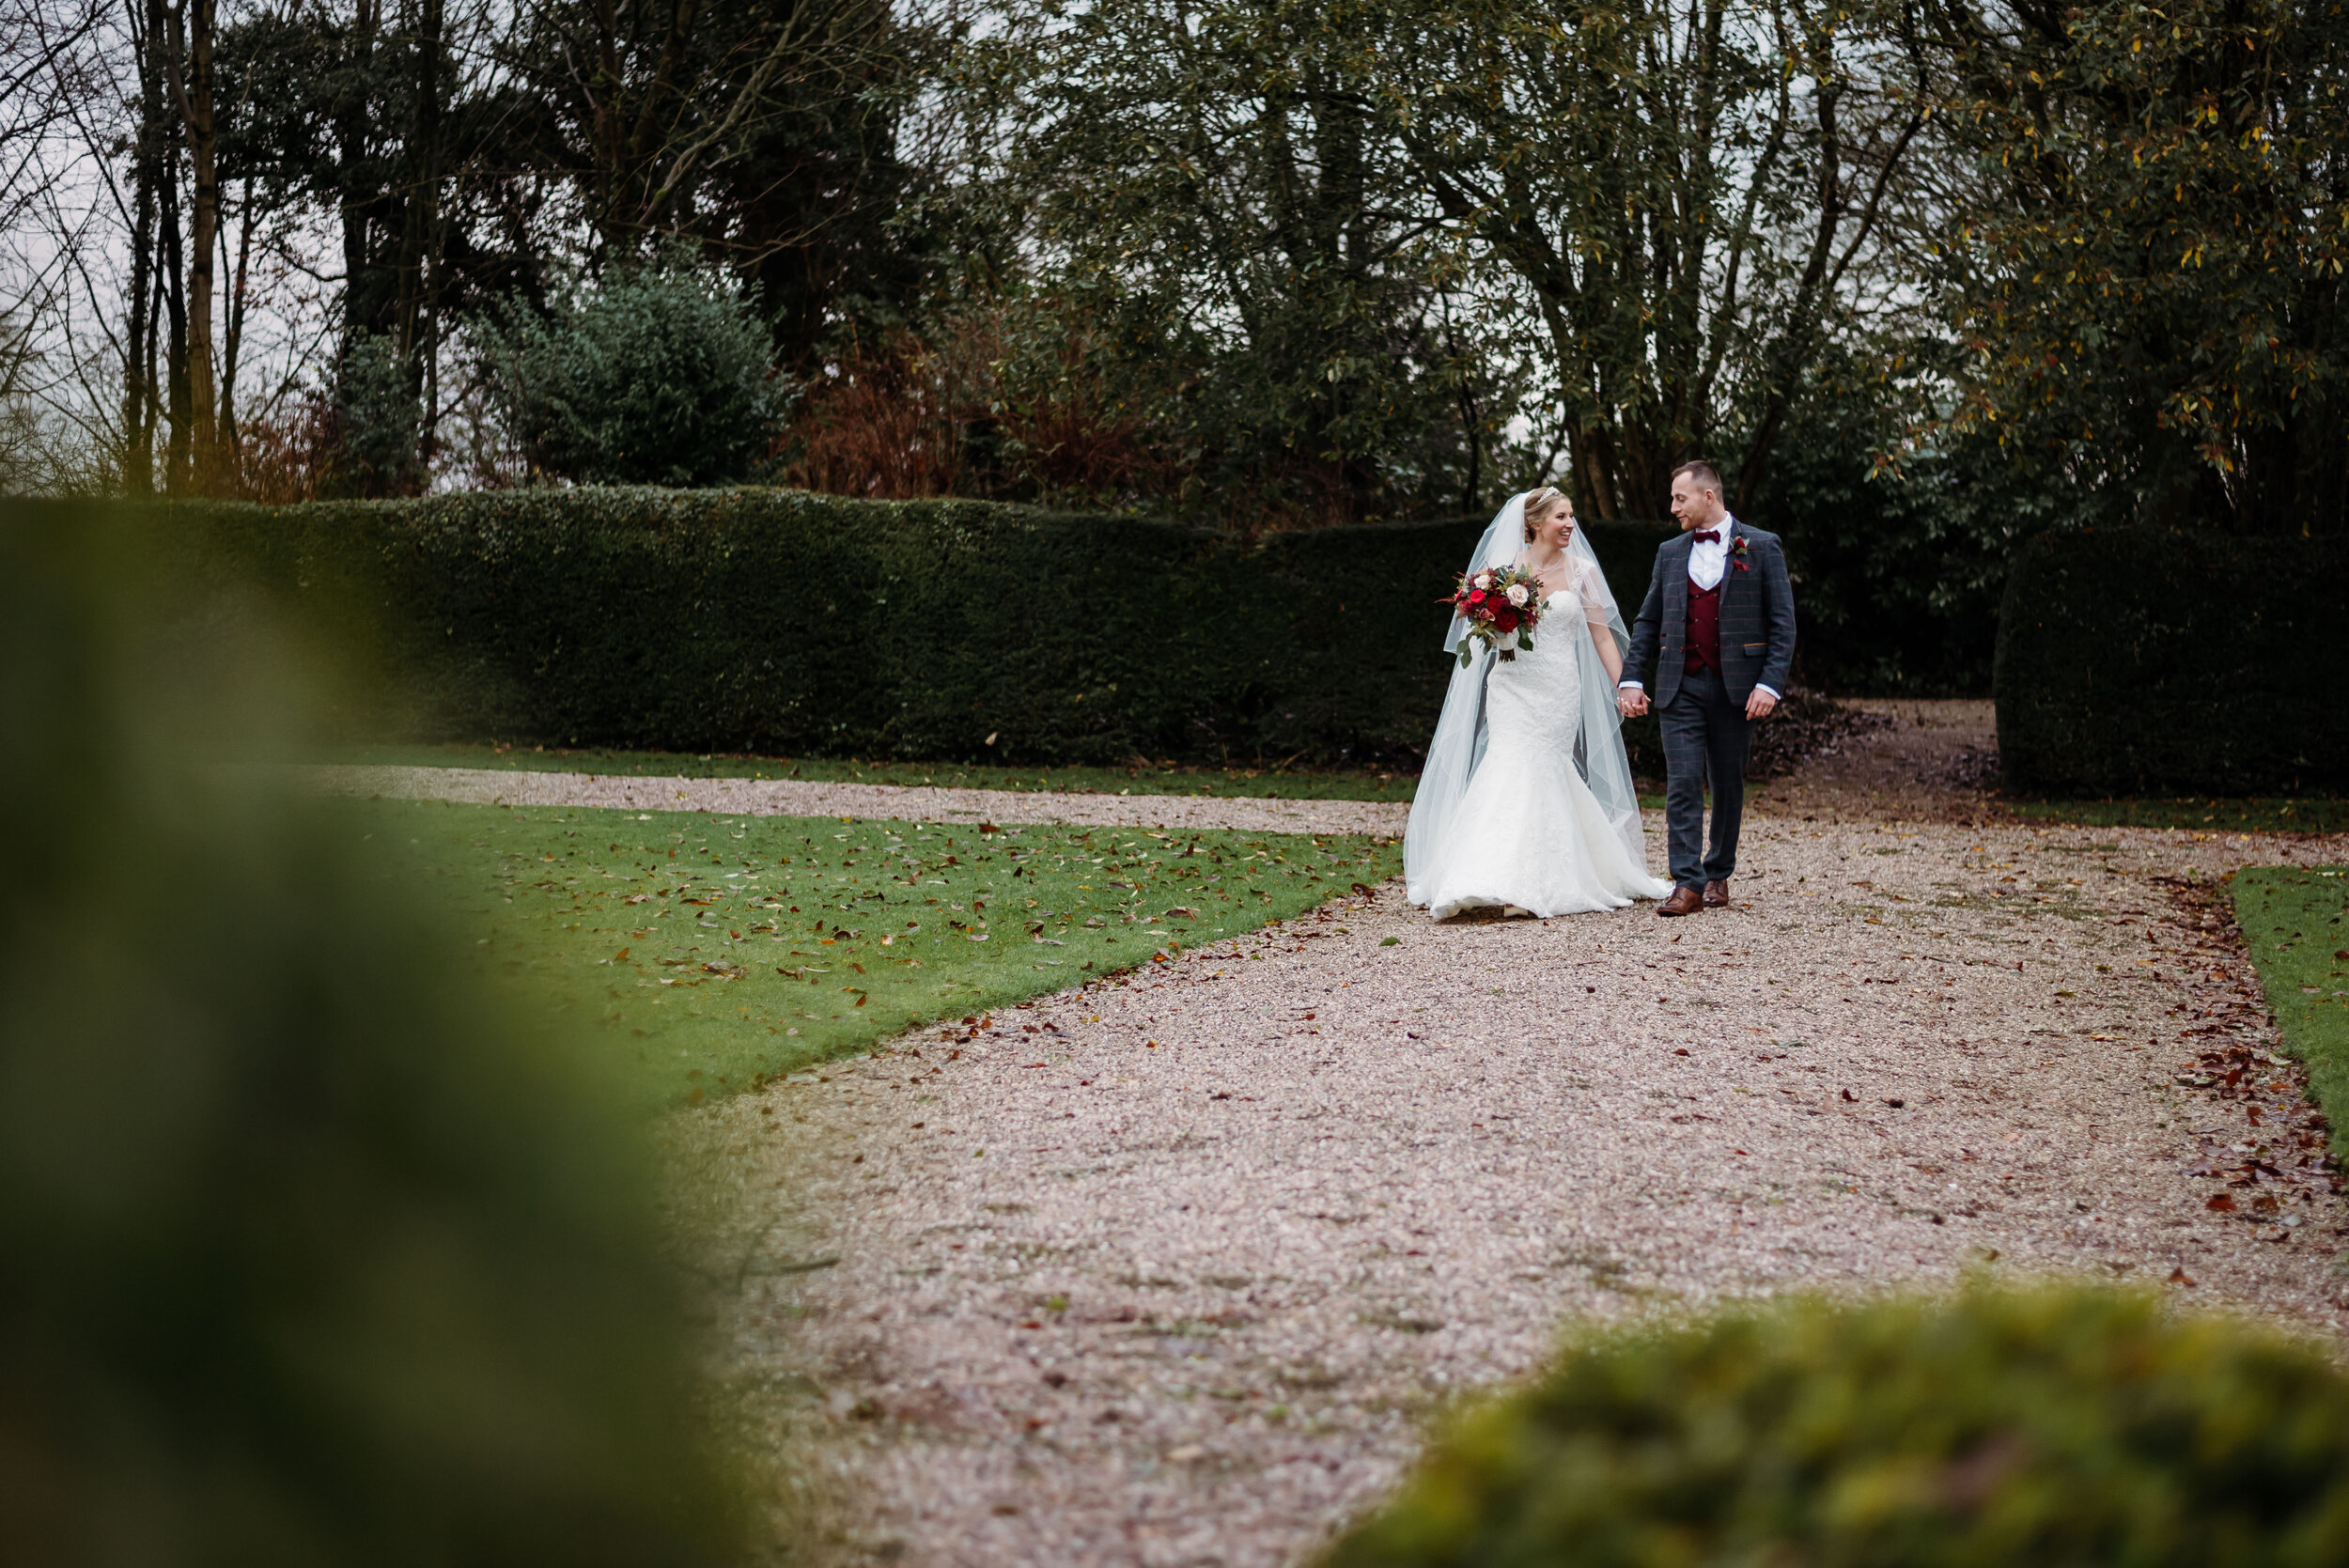 Winter bride and groom walking through the grounds at Eaves Hall